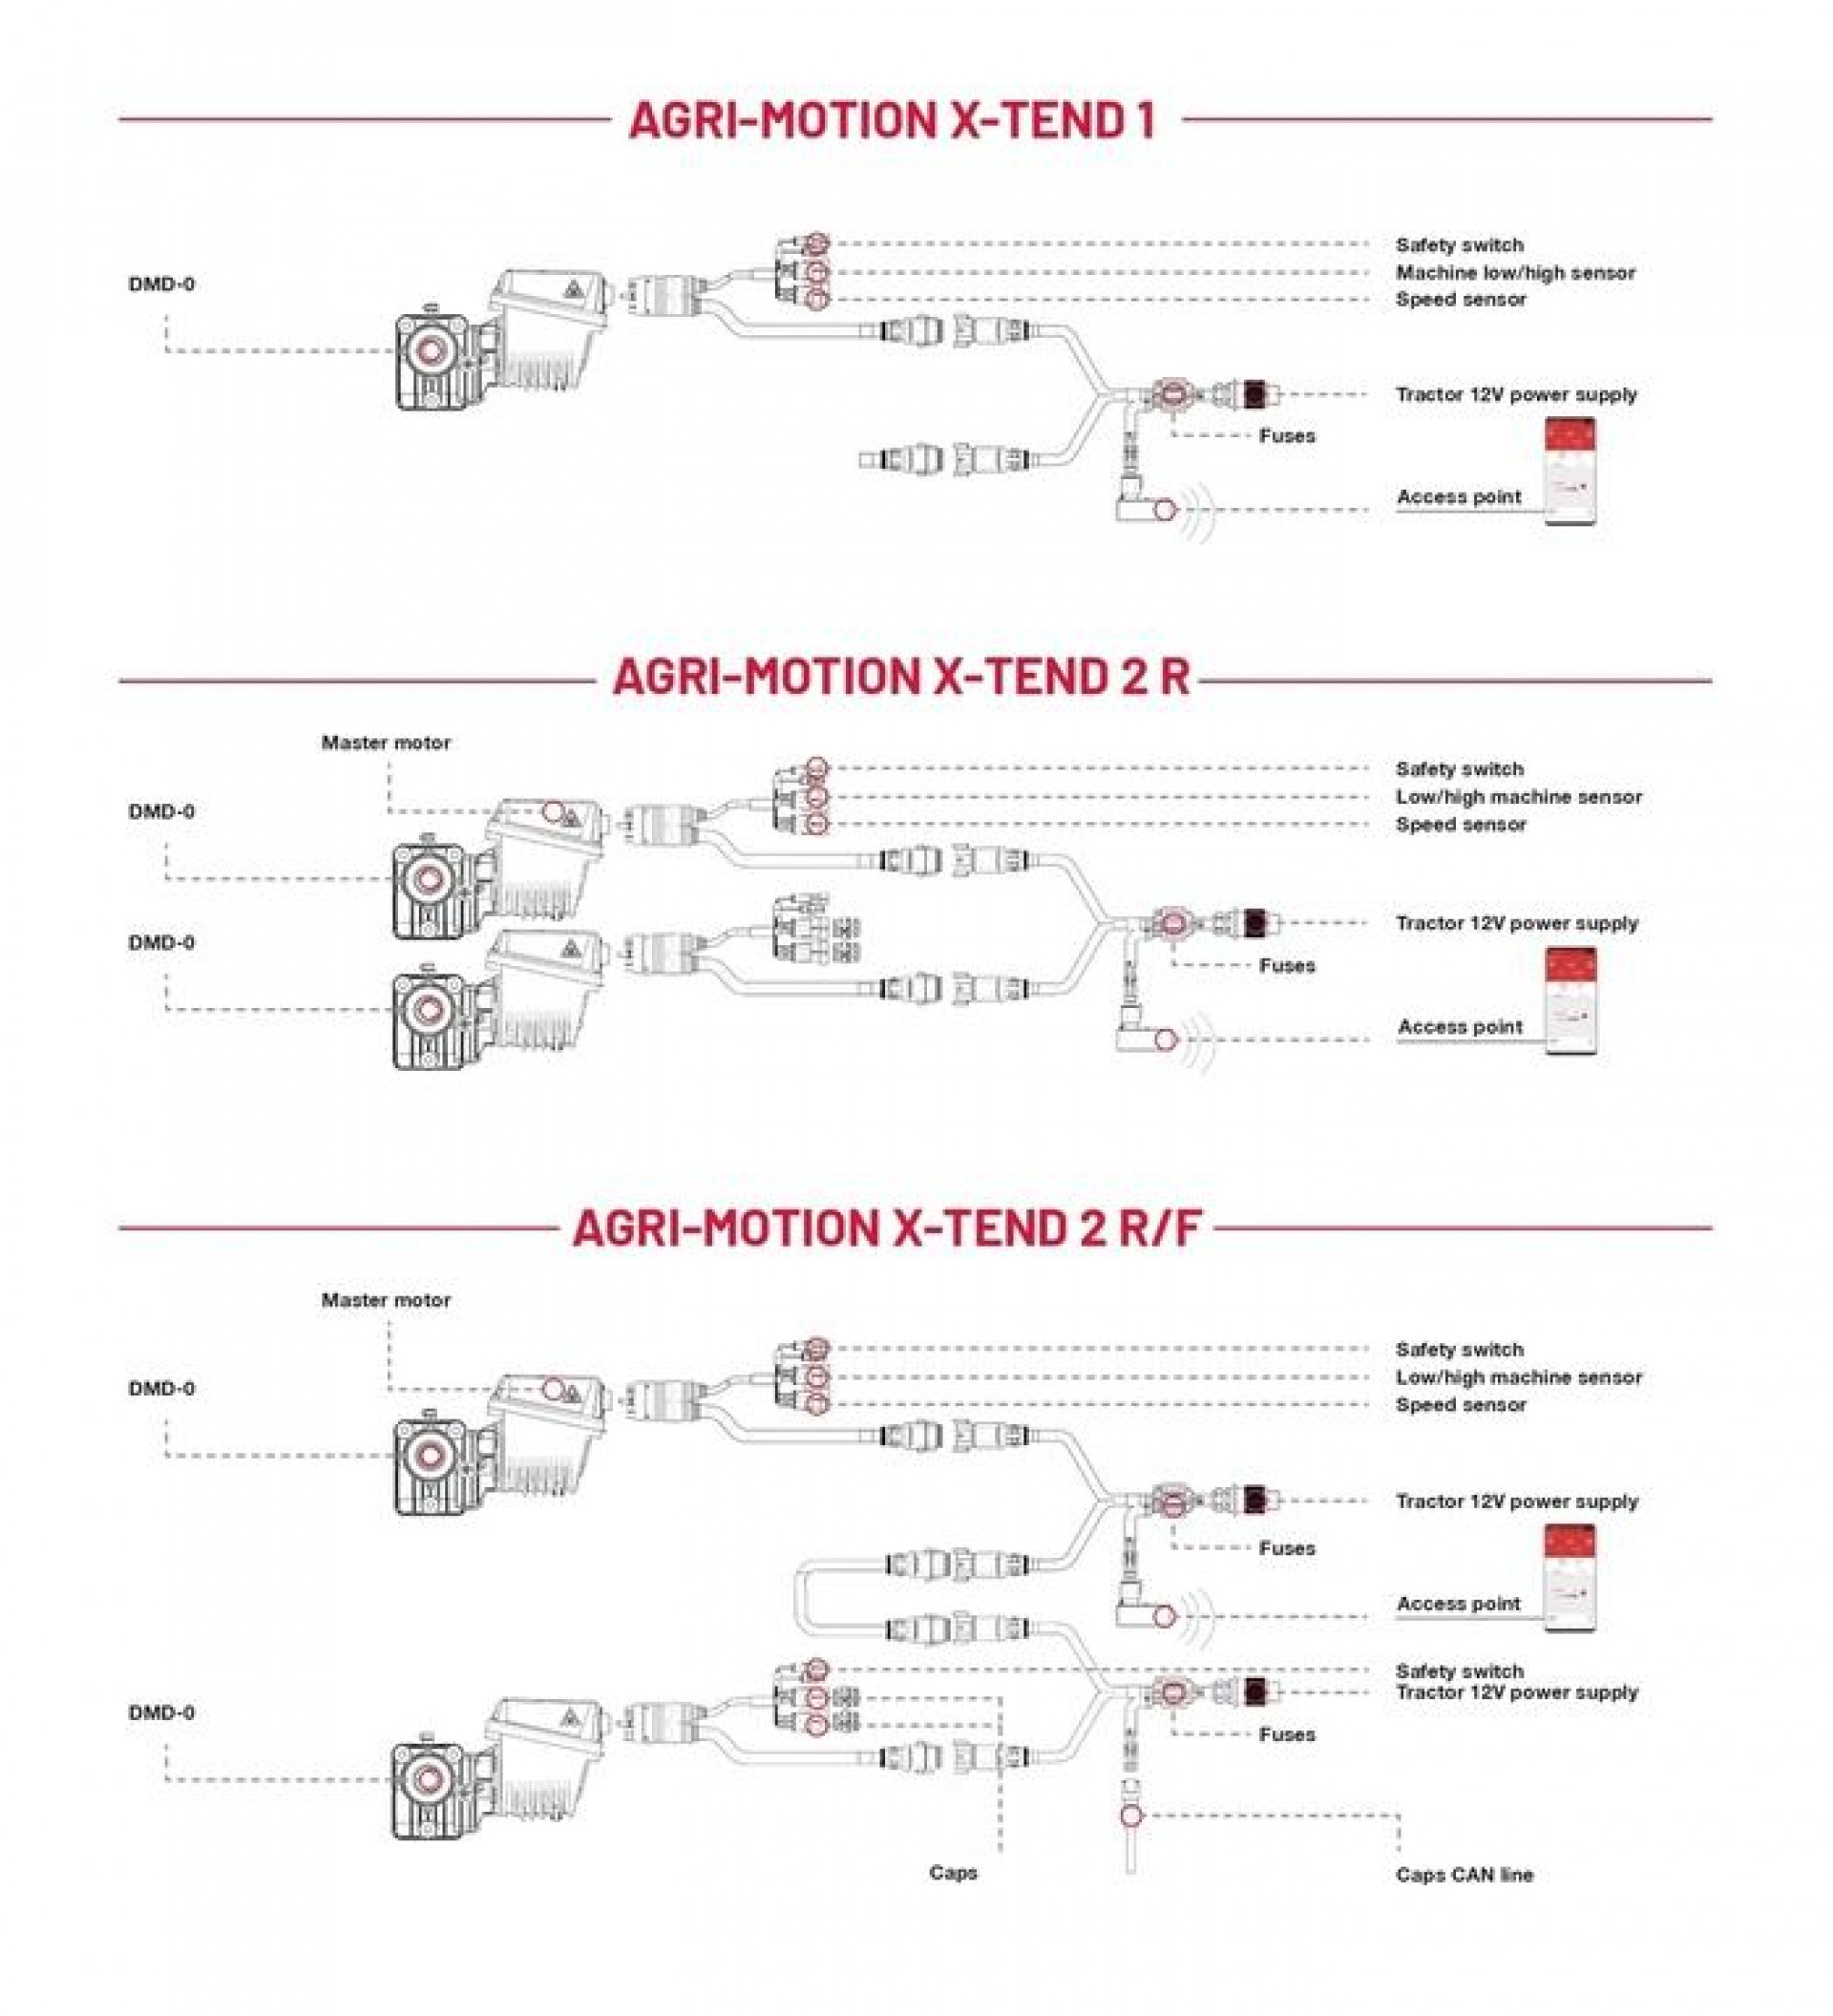 road map of the Agri-Motion X-Tend panel in English